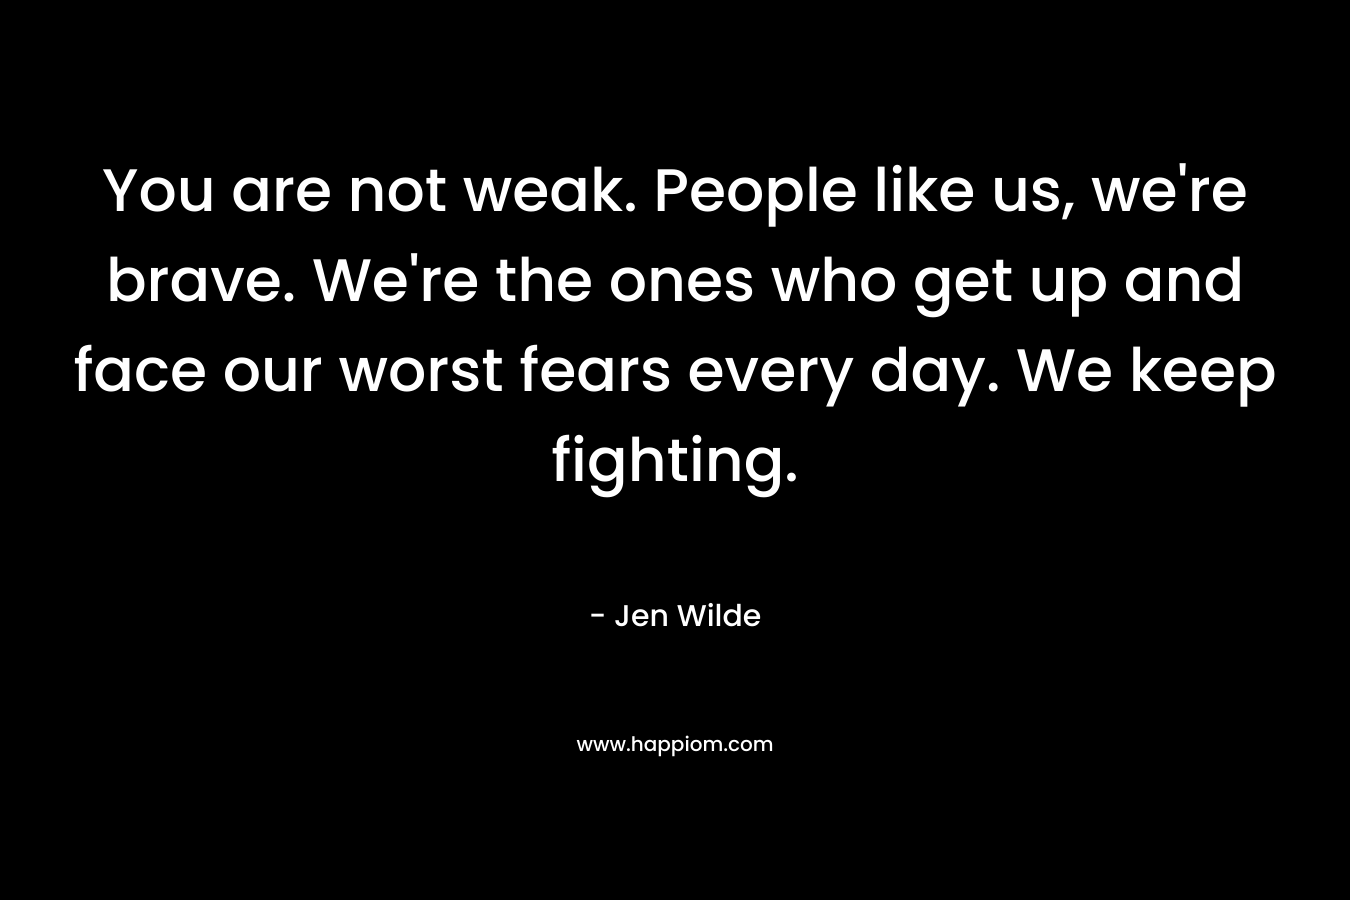 You are not weak. People like us, we're brave. We're the ones who get up and face our worst fears every day. We keep fighting.